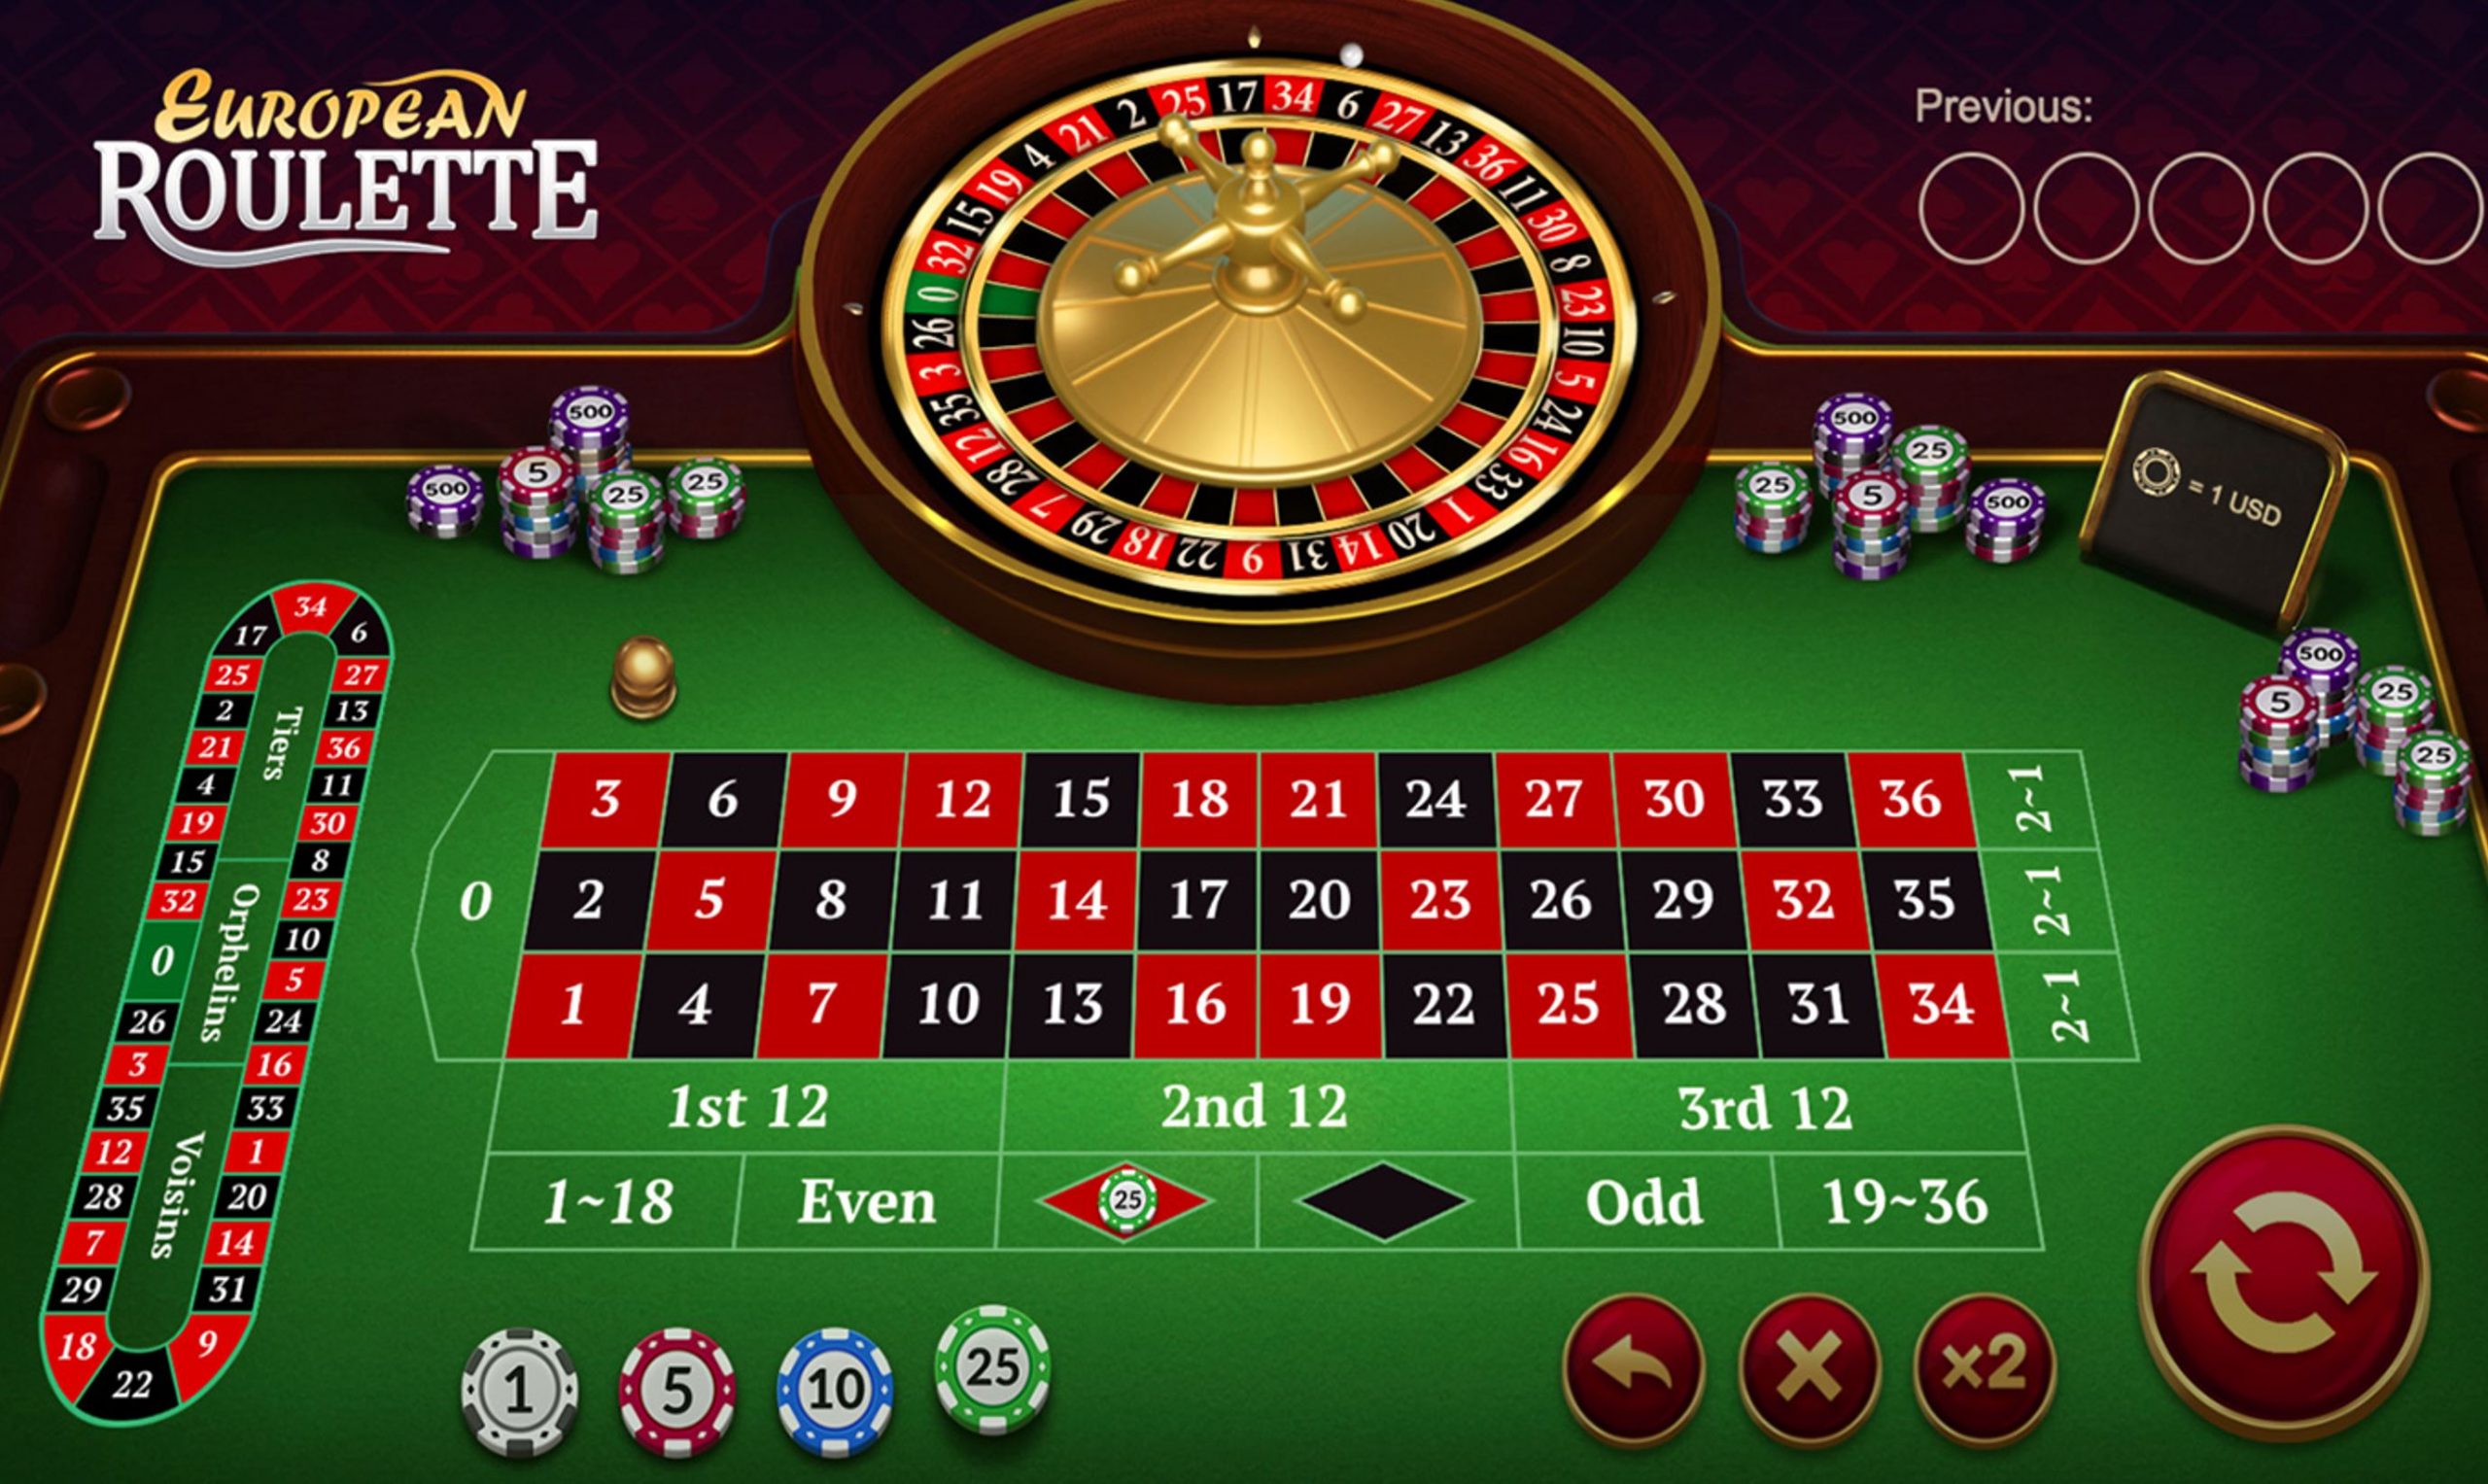 Tips For Getting the Best Payouts on European Roulette